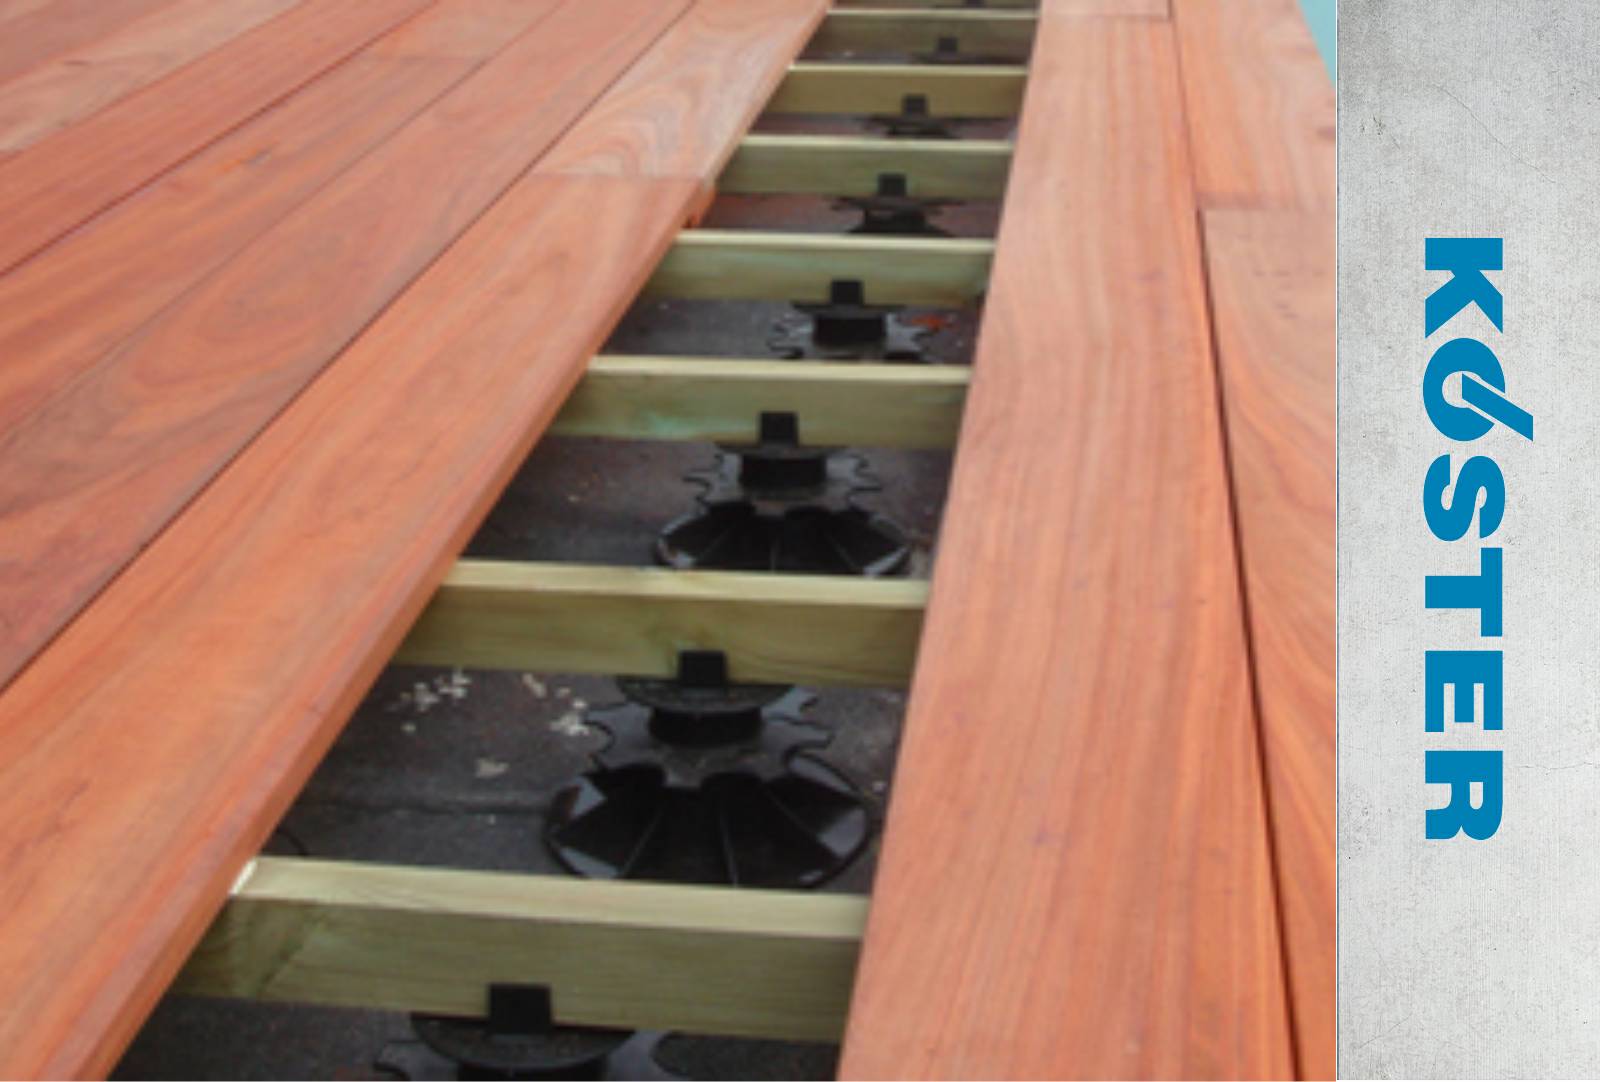 Koster Adjustable Pedestal Supports - For paving and decking over a flat roof.